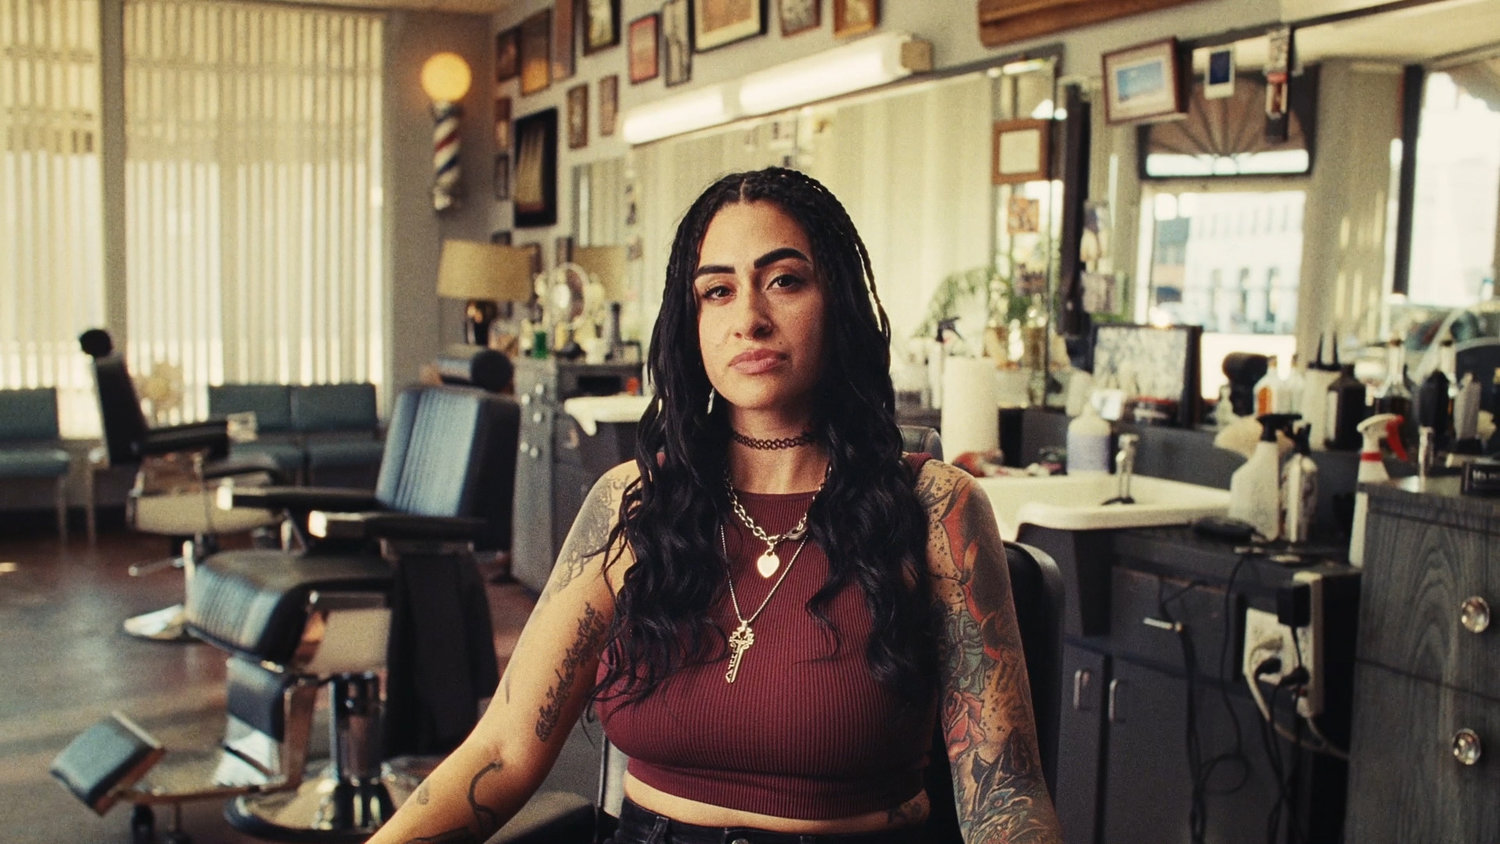 Jamie Rodriguez, of Merrick, acted in her first commercial last October, cutting a man’s hair in the bathroom of a Los Angeles home. The Wantagh barber starred in the Ruffles “Own Your Ridges” campaign, which premiered on Christmas Day.